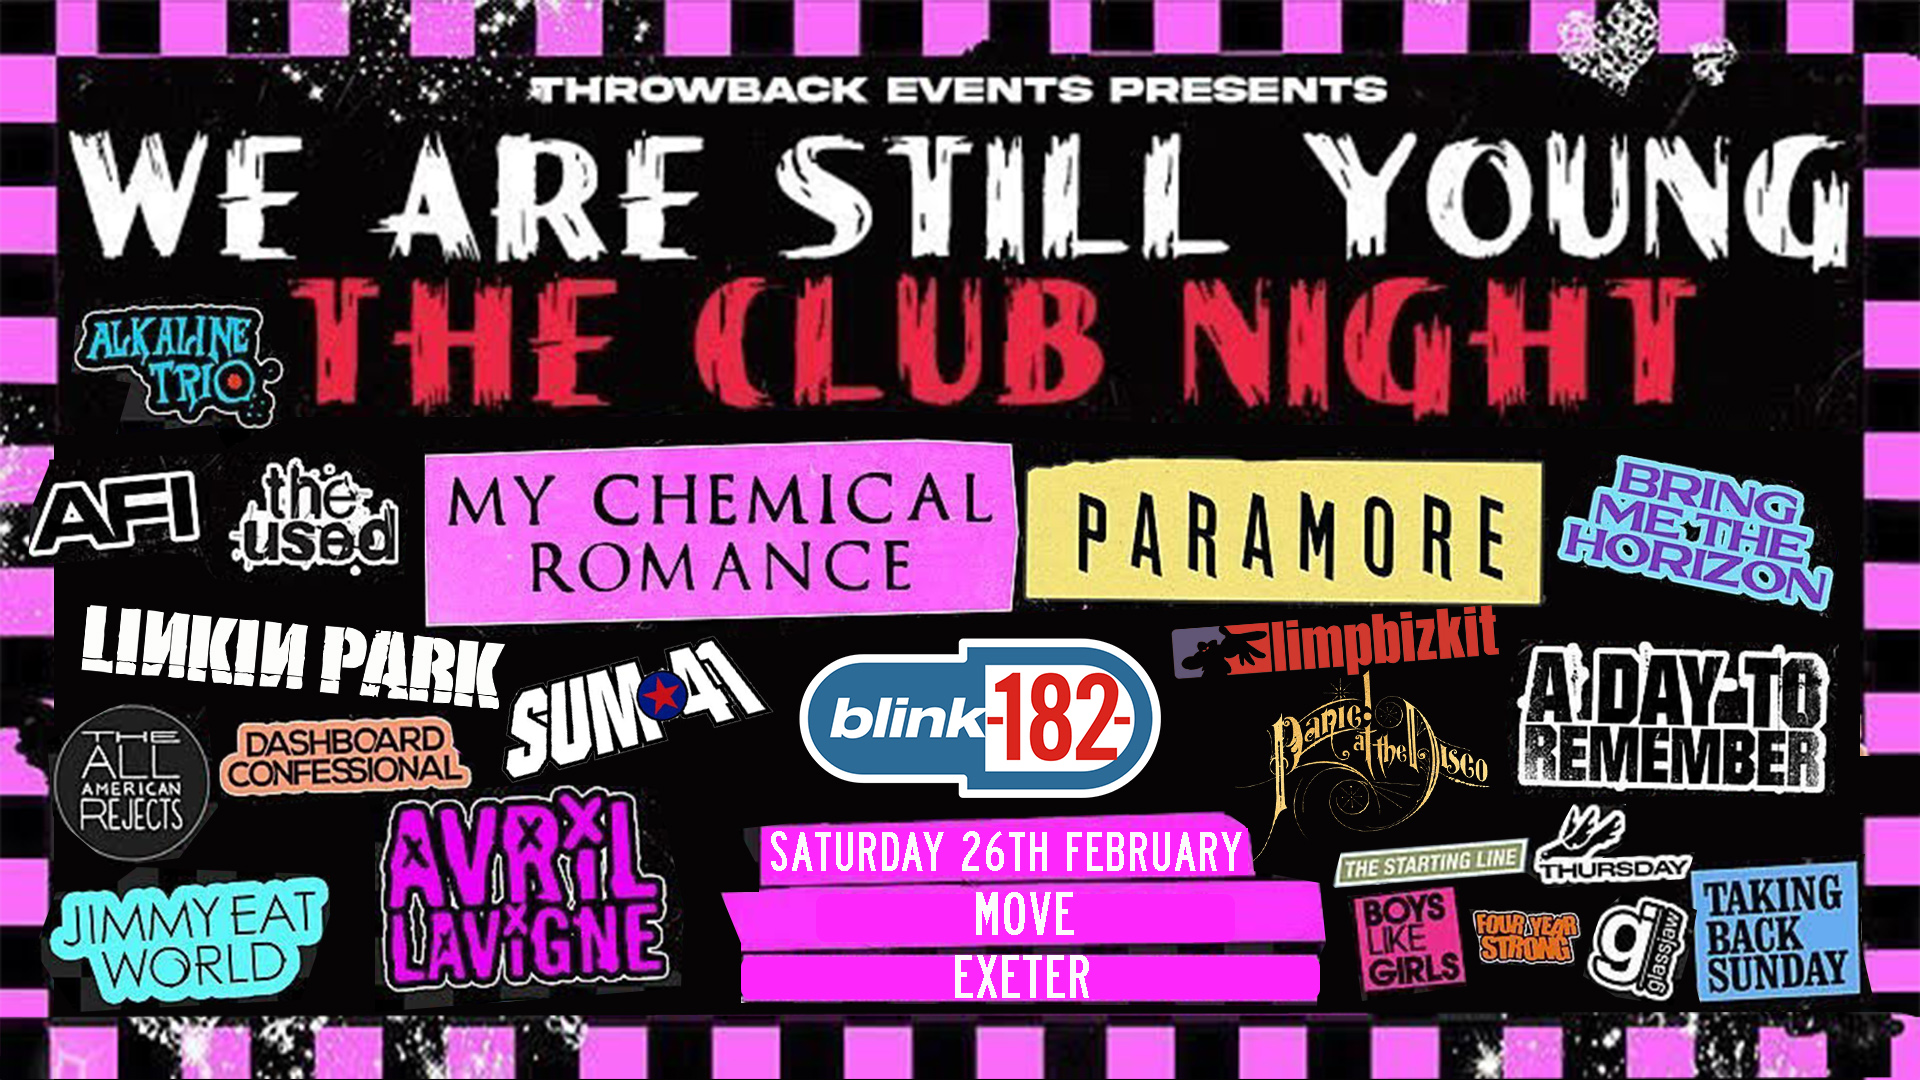 We Are Still Young: The Club Night (Exeter) at Move, Exeter on 26th Feb ...